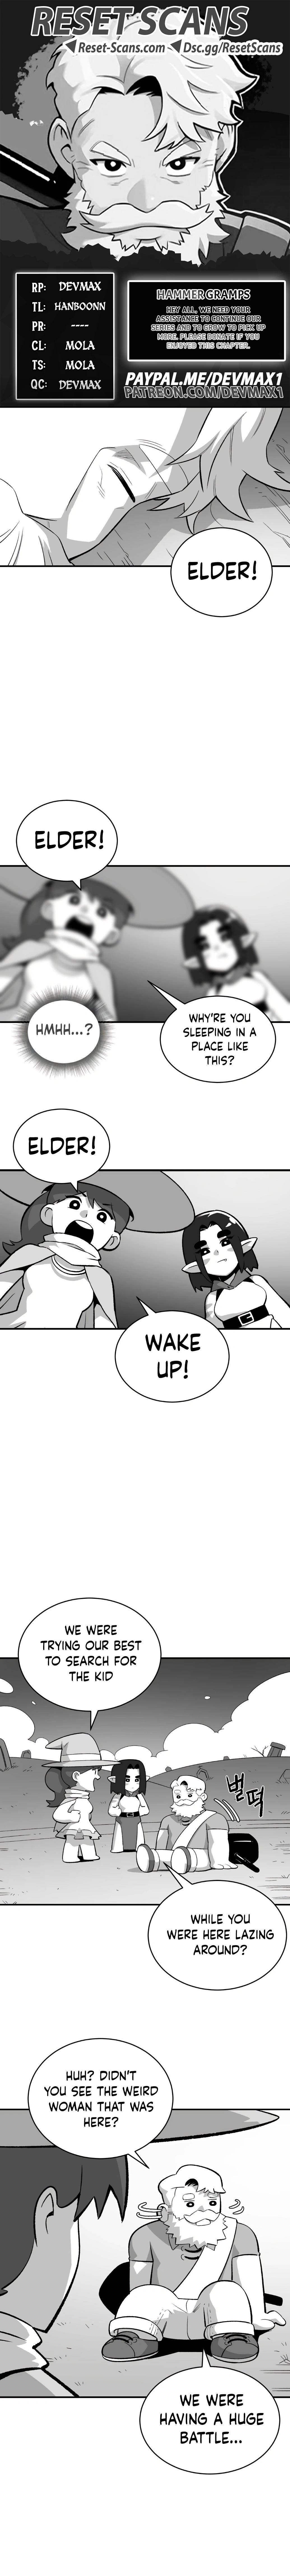 Hammer Gramps - Page 1